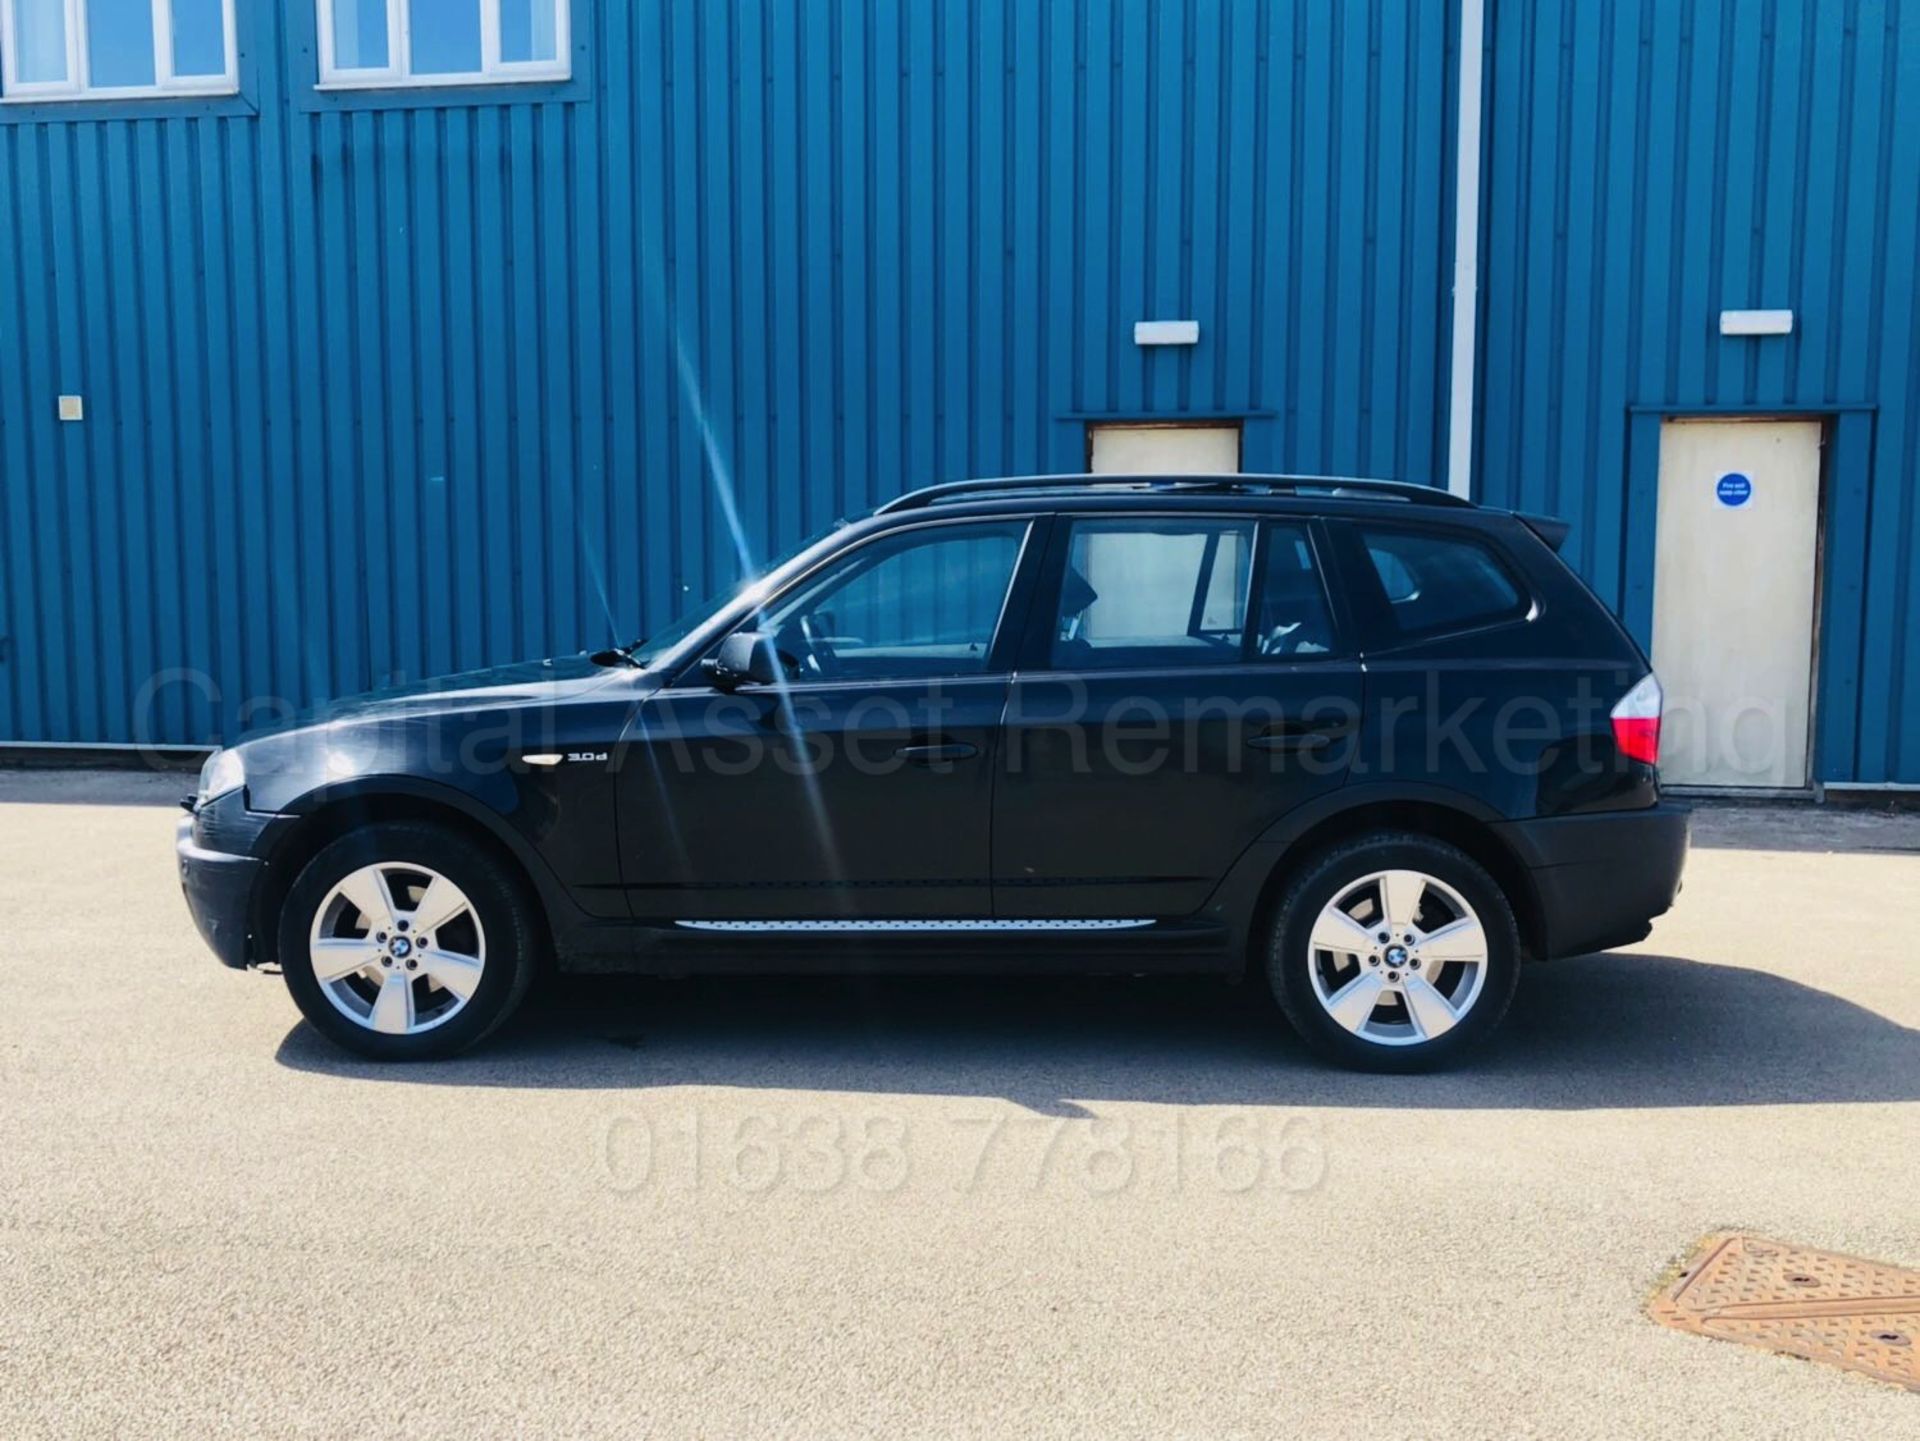 BMW X3 *SPORT EDITION* (2006) '3.0 DIESEL - 218 BHP - AUTOMATIC' *LEATHER / AIR CON* (NO VAT) - Image 6 of 29